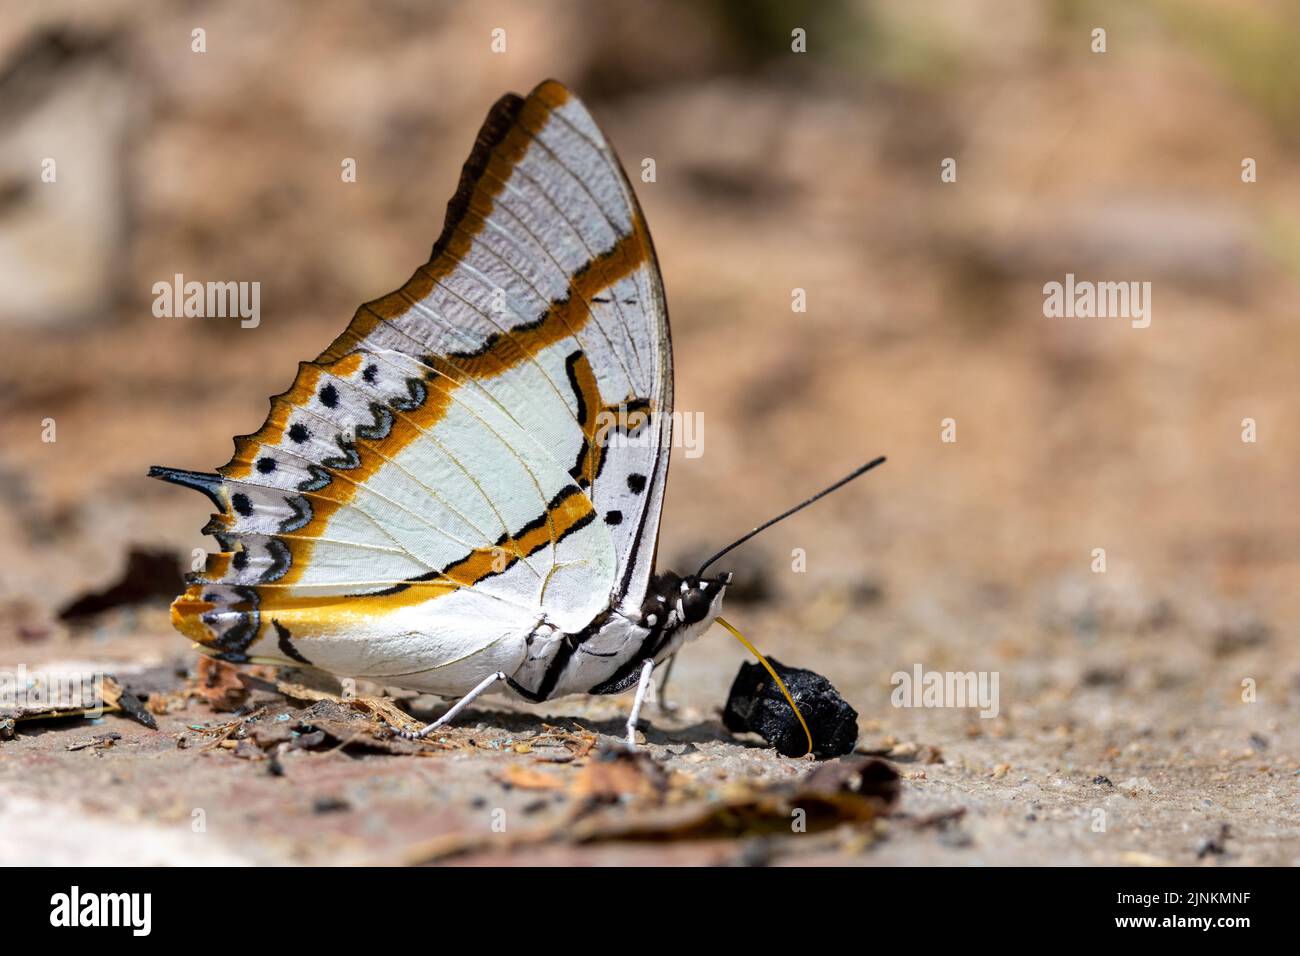 A Shan Nawab butterfly is gathering some water from the wet soil, Thailand Stock Photo